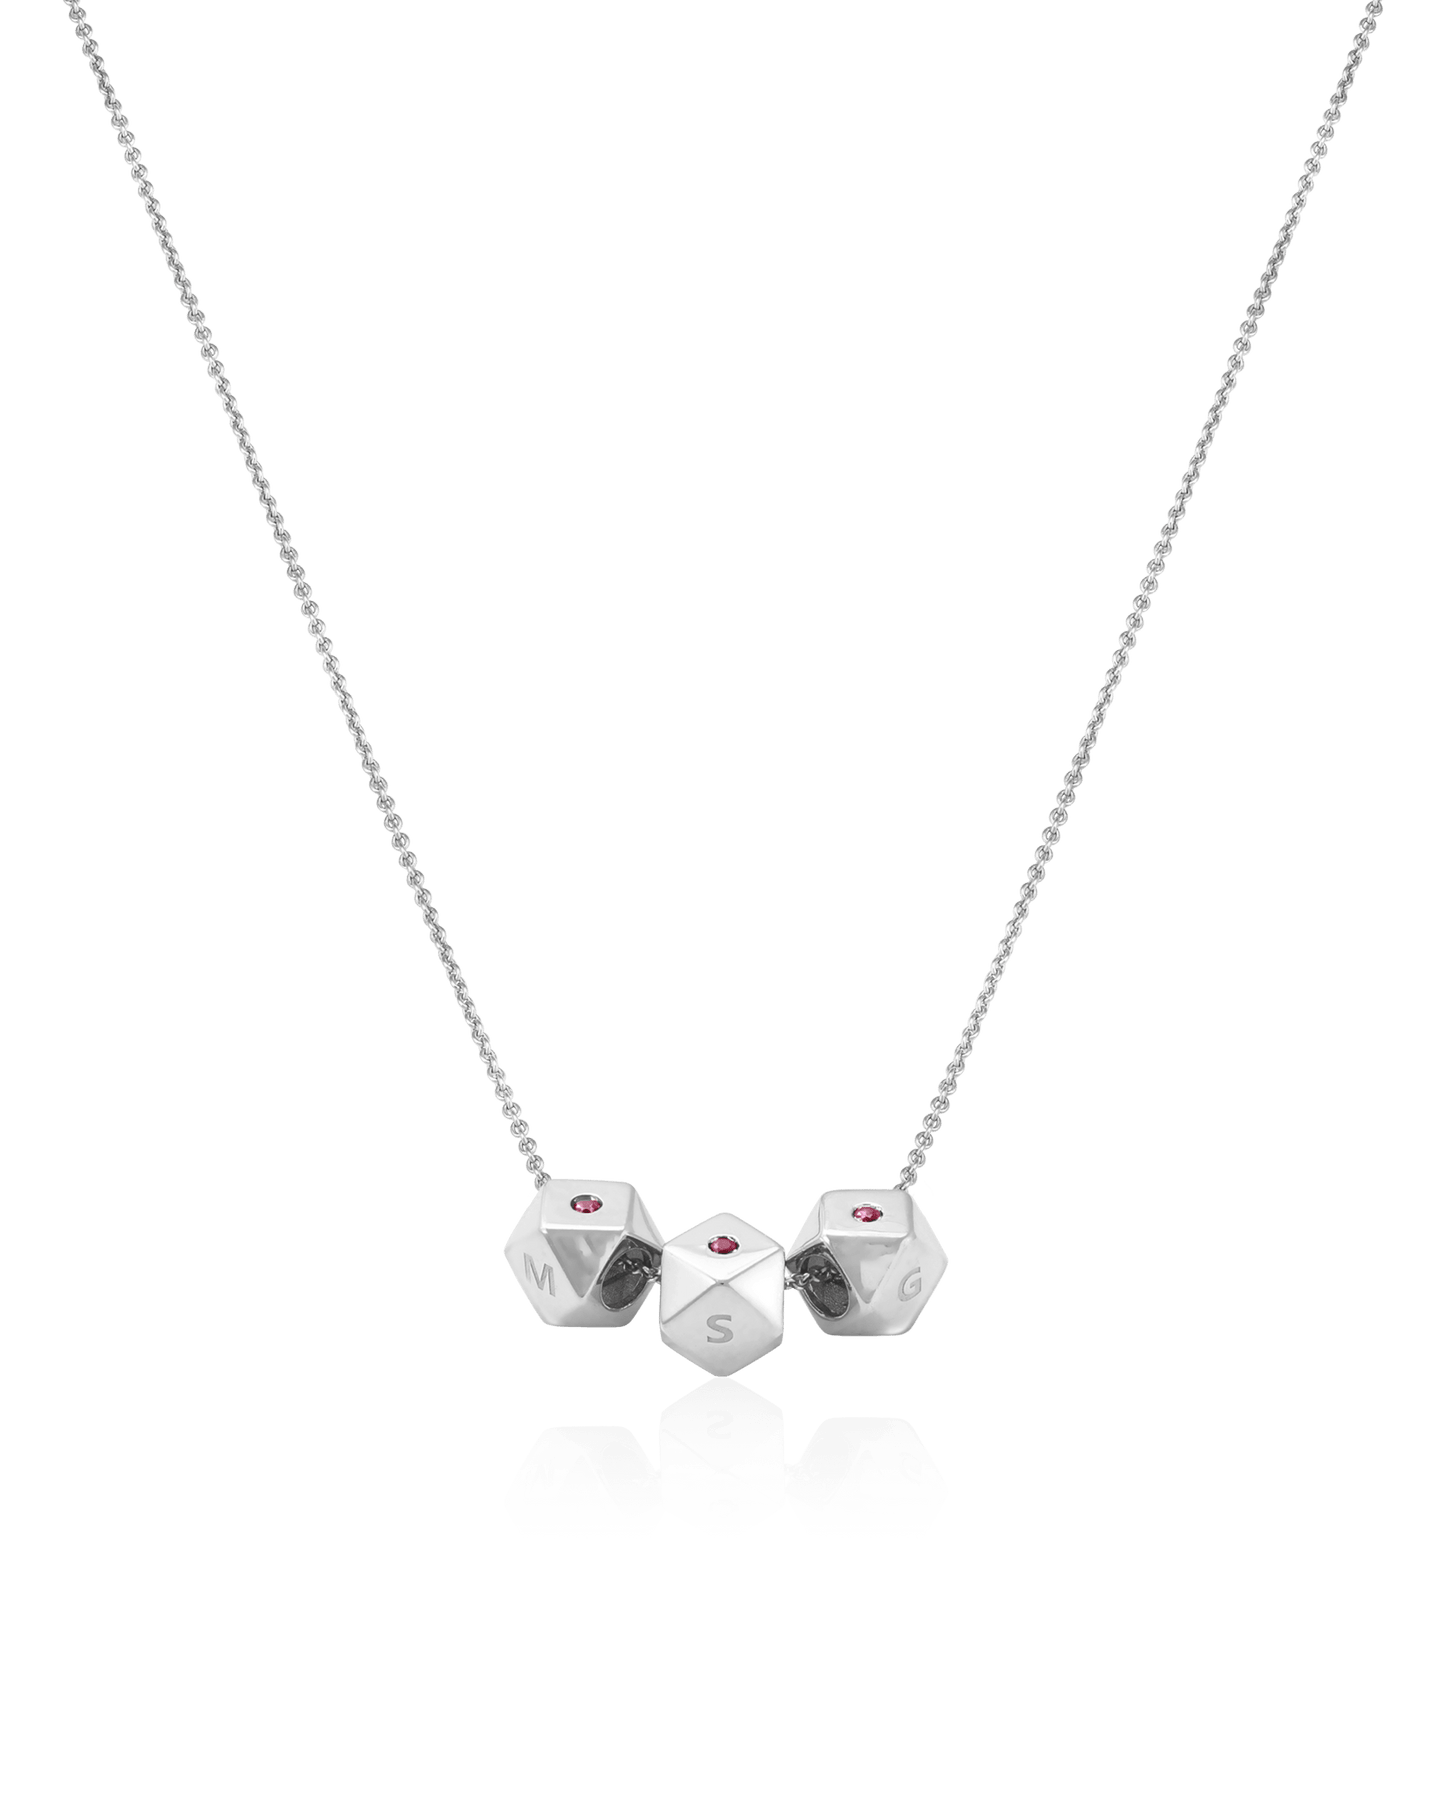 Hedra Necklace - 14K White Gold Necklaces magal-dev 